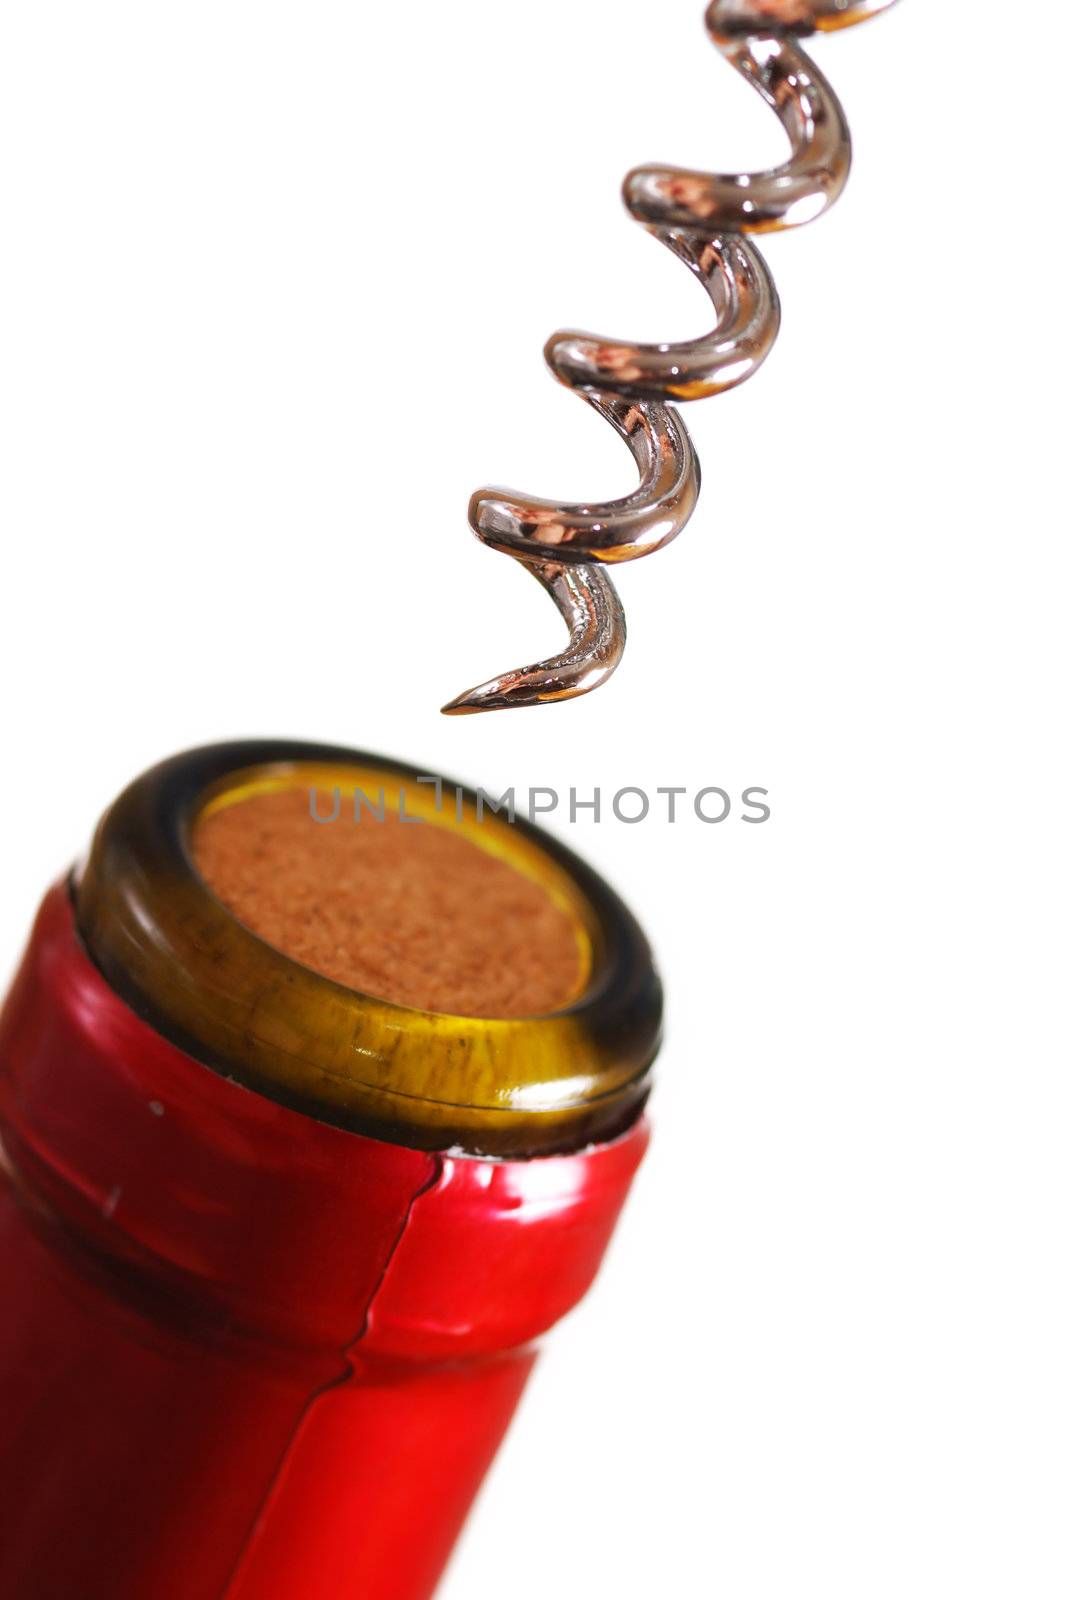 Opening a wine bottle with corkscrew, isolated on white